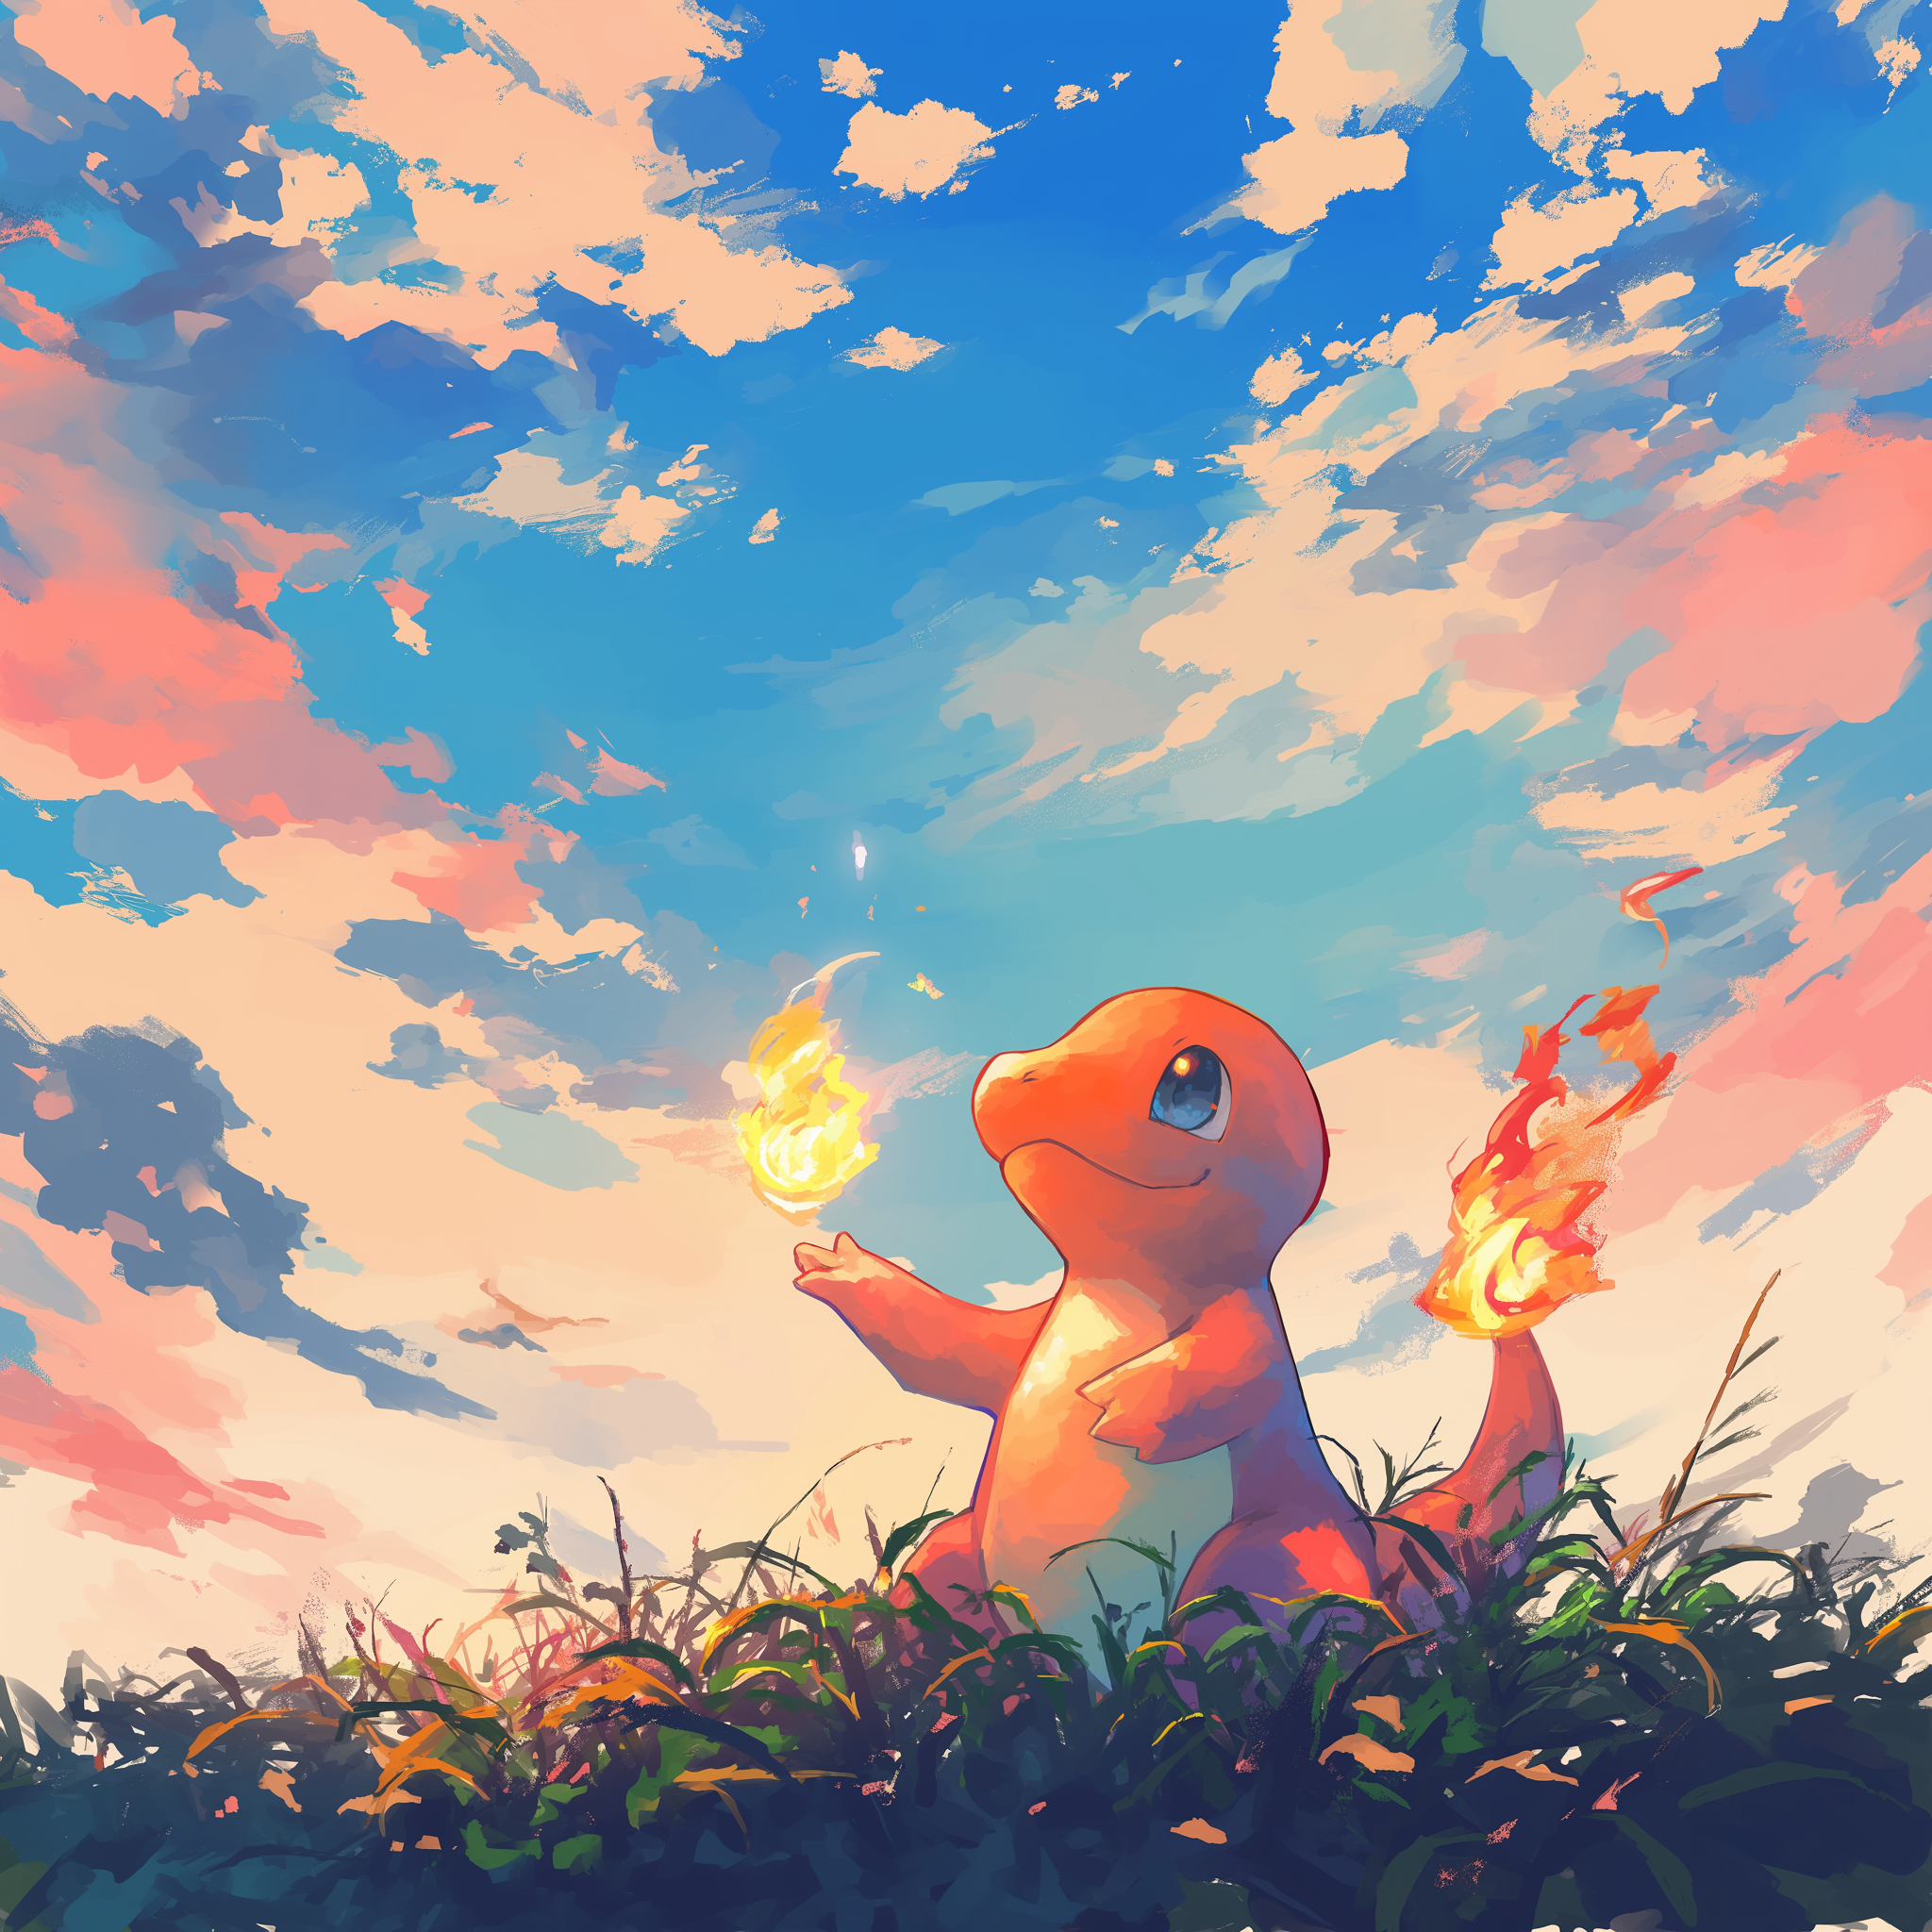 Avatar featuring a cartoon illustration of Charmander, a classic Pokémon, set against a vibrant sky with flame-tipped tail ignited, ideal for profile picture use.